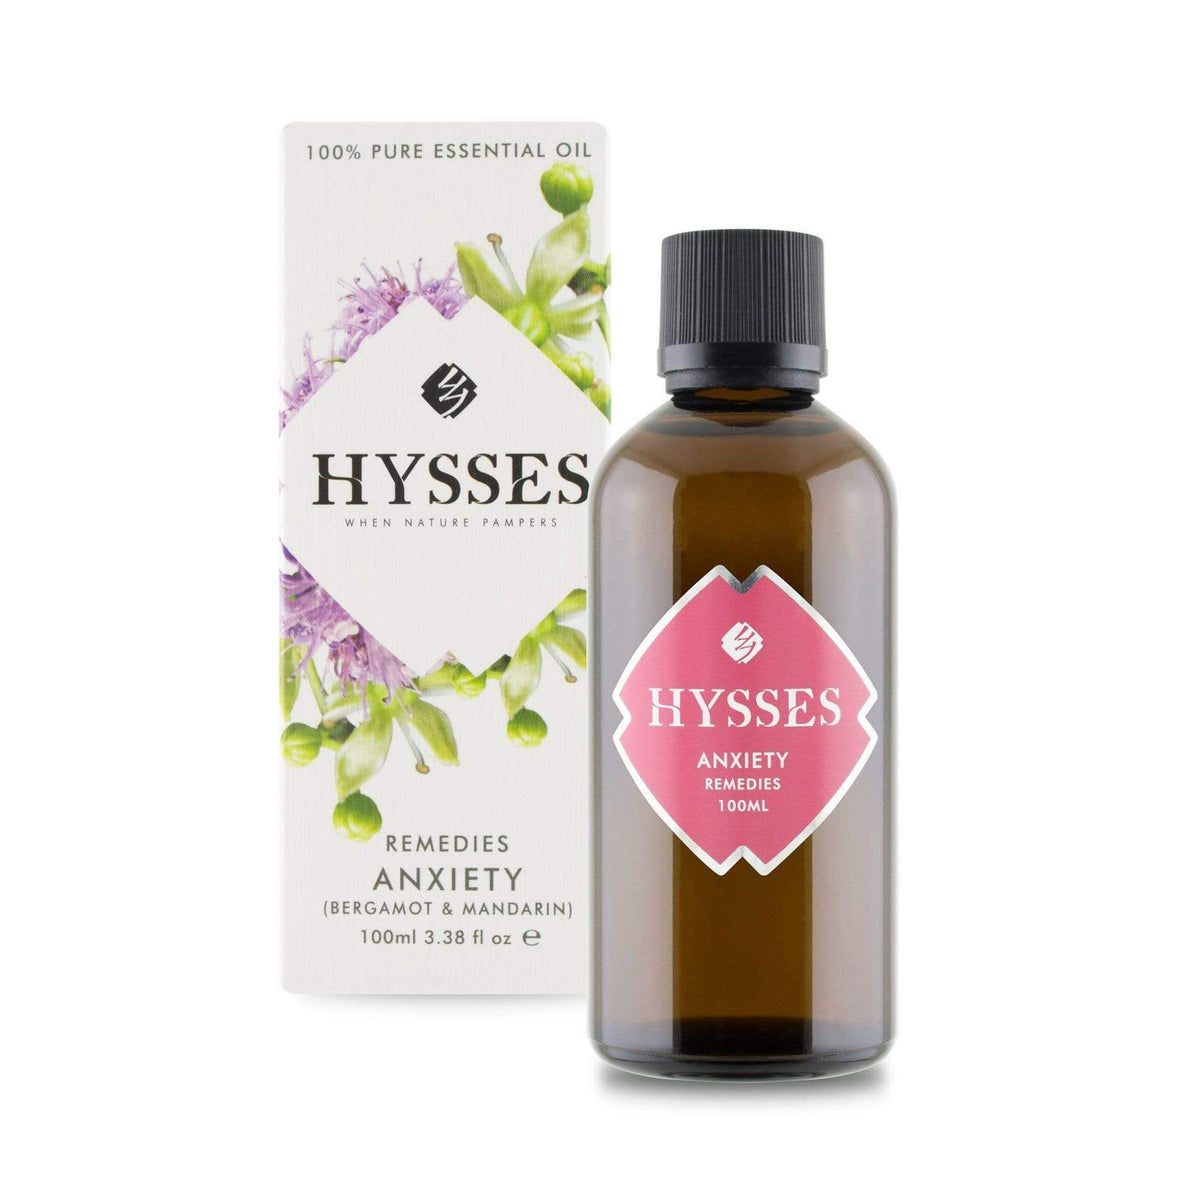 Hysses Essential Oil 100ml Remedies, Anxiety